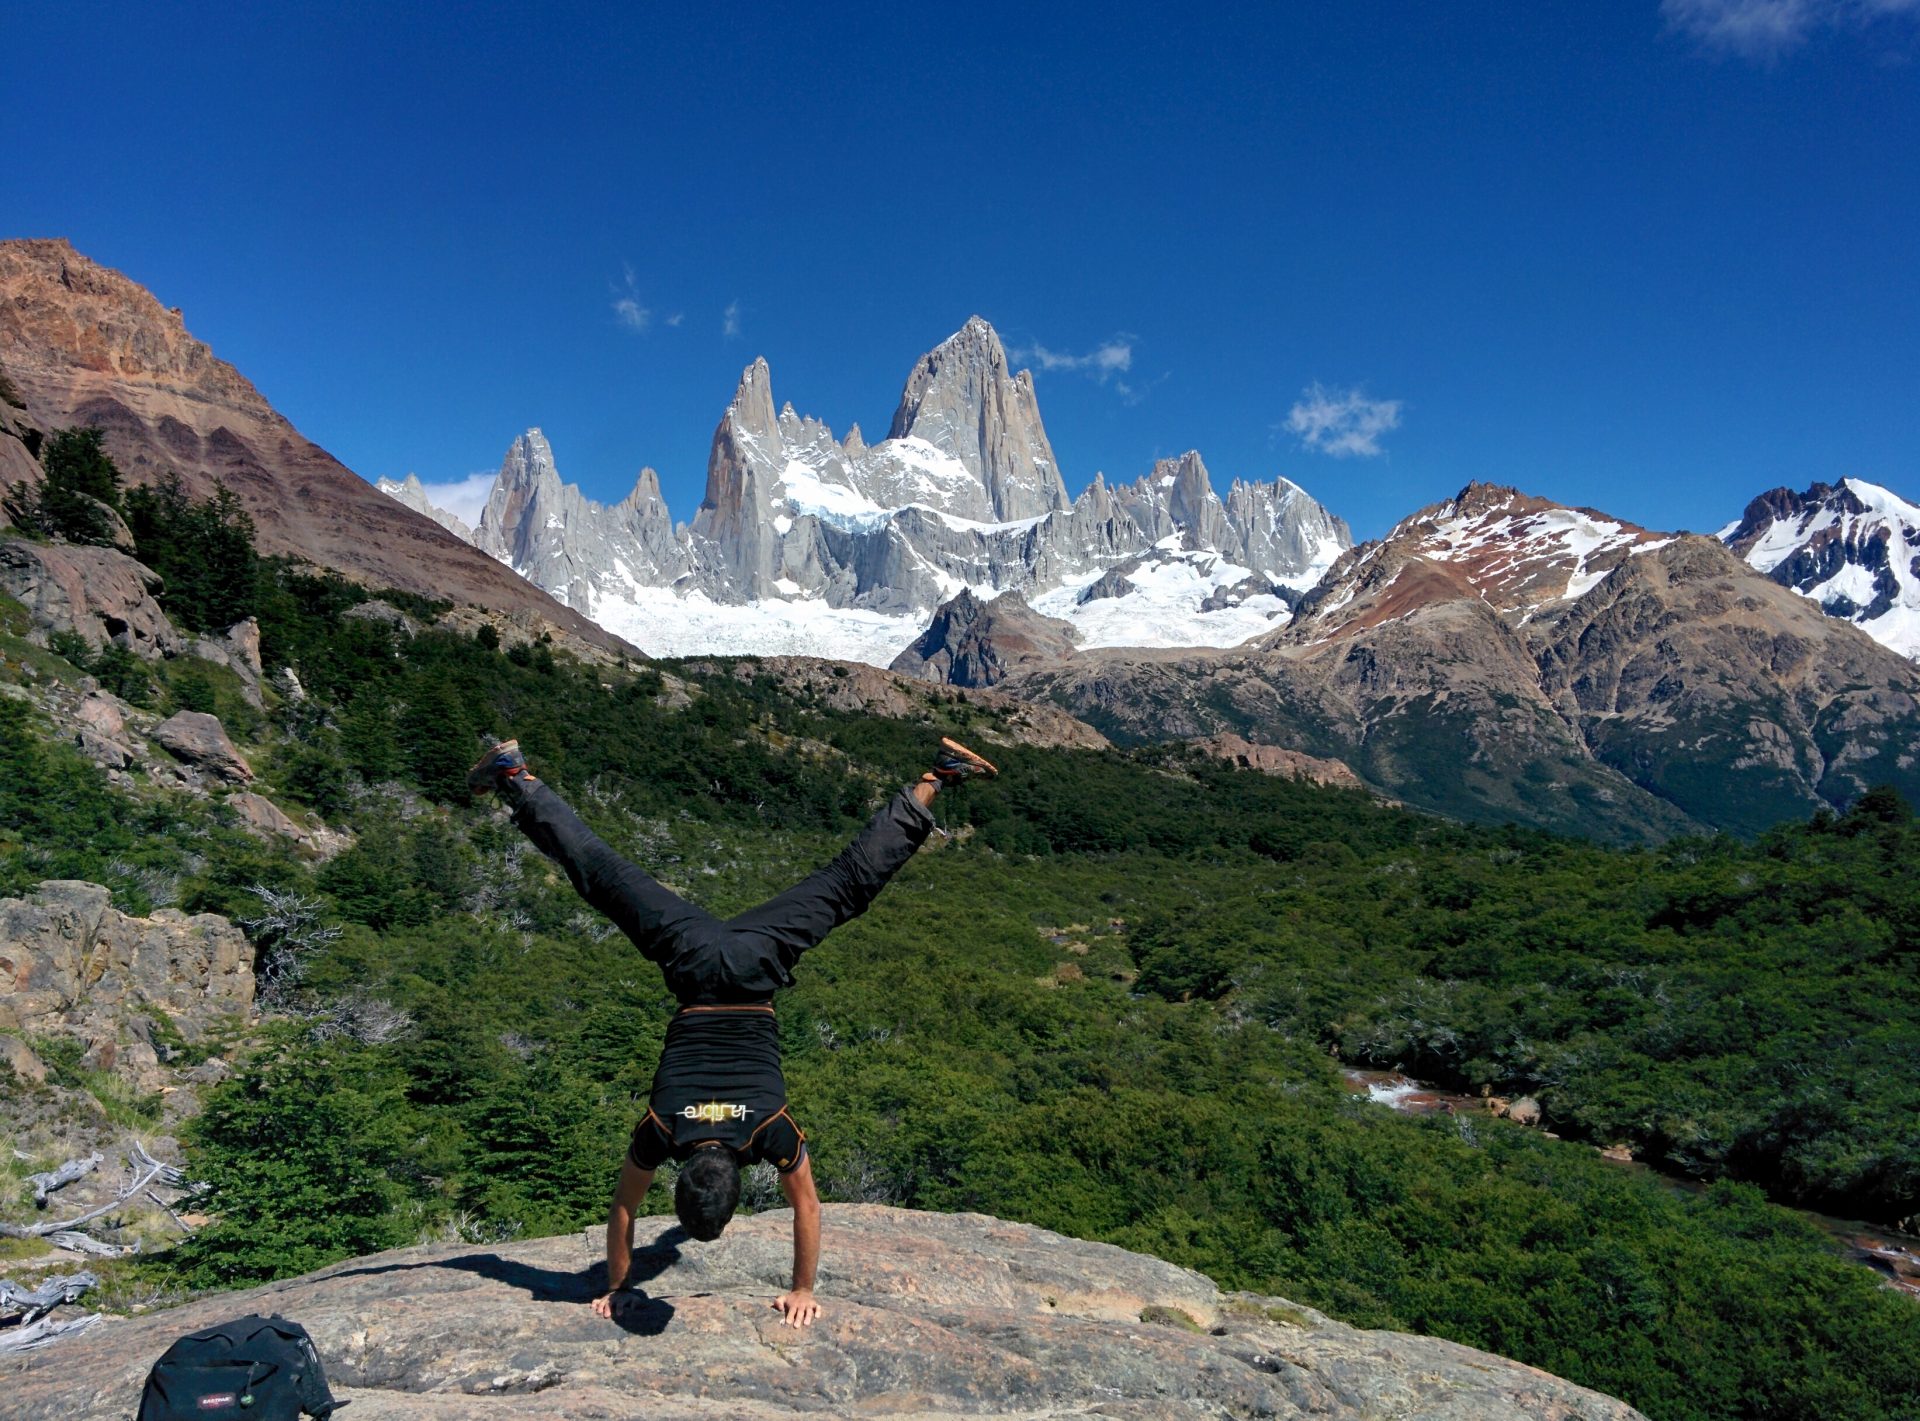 Being in balanced with the Fitz Roy behind